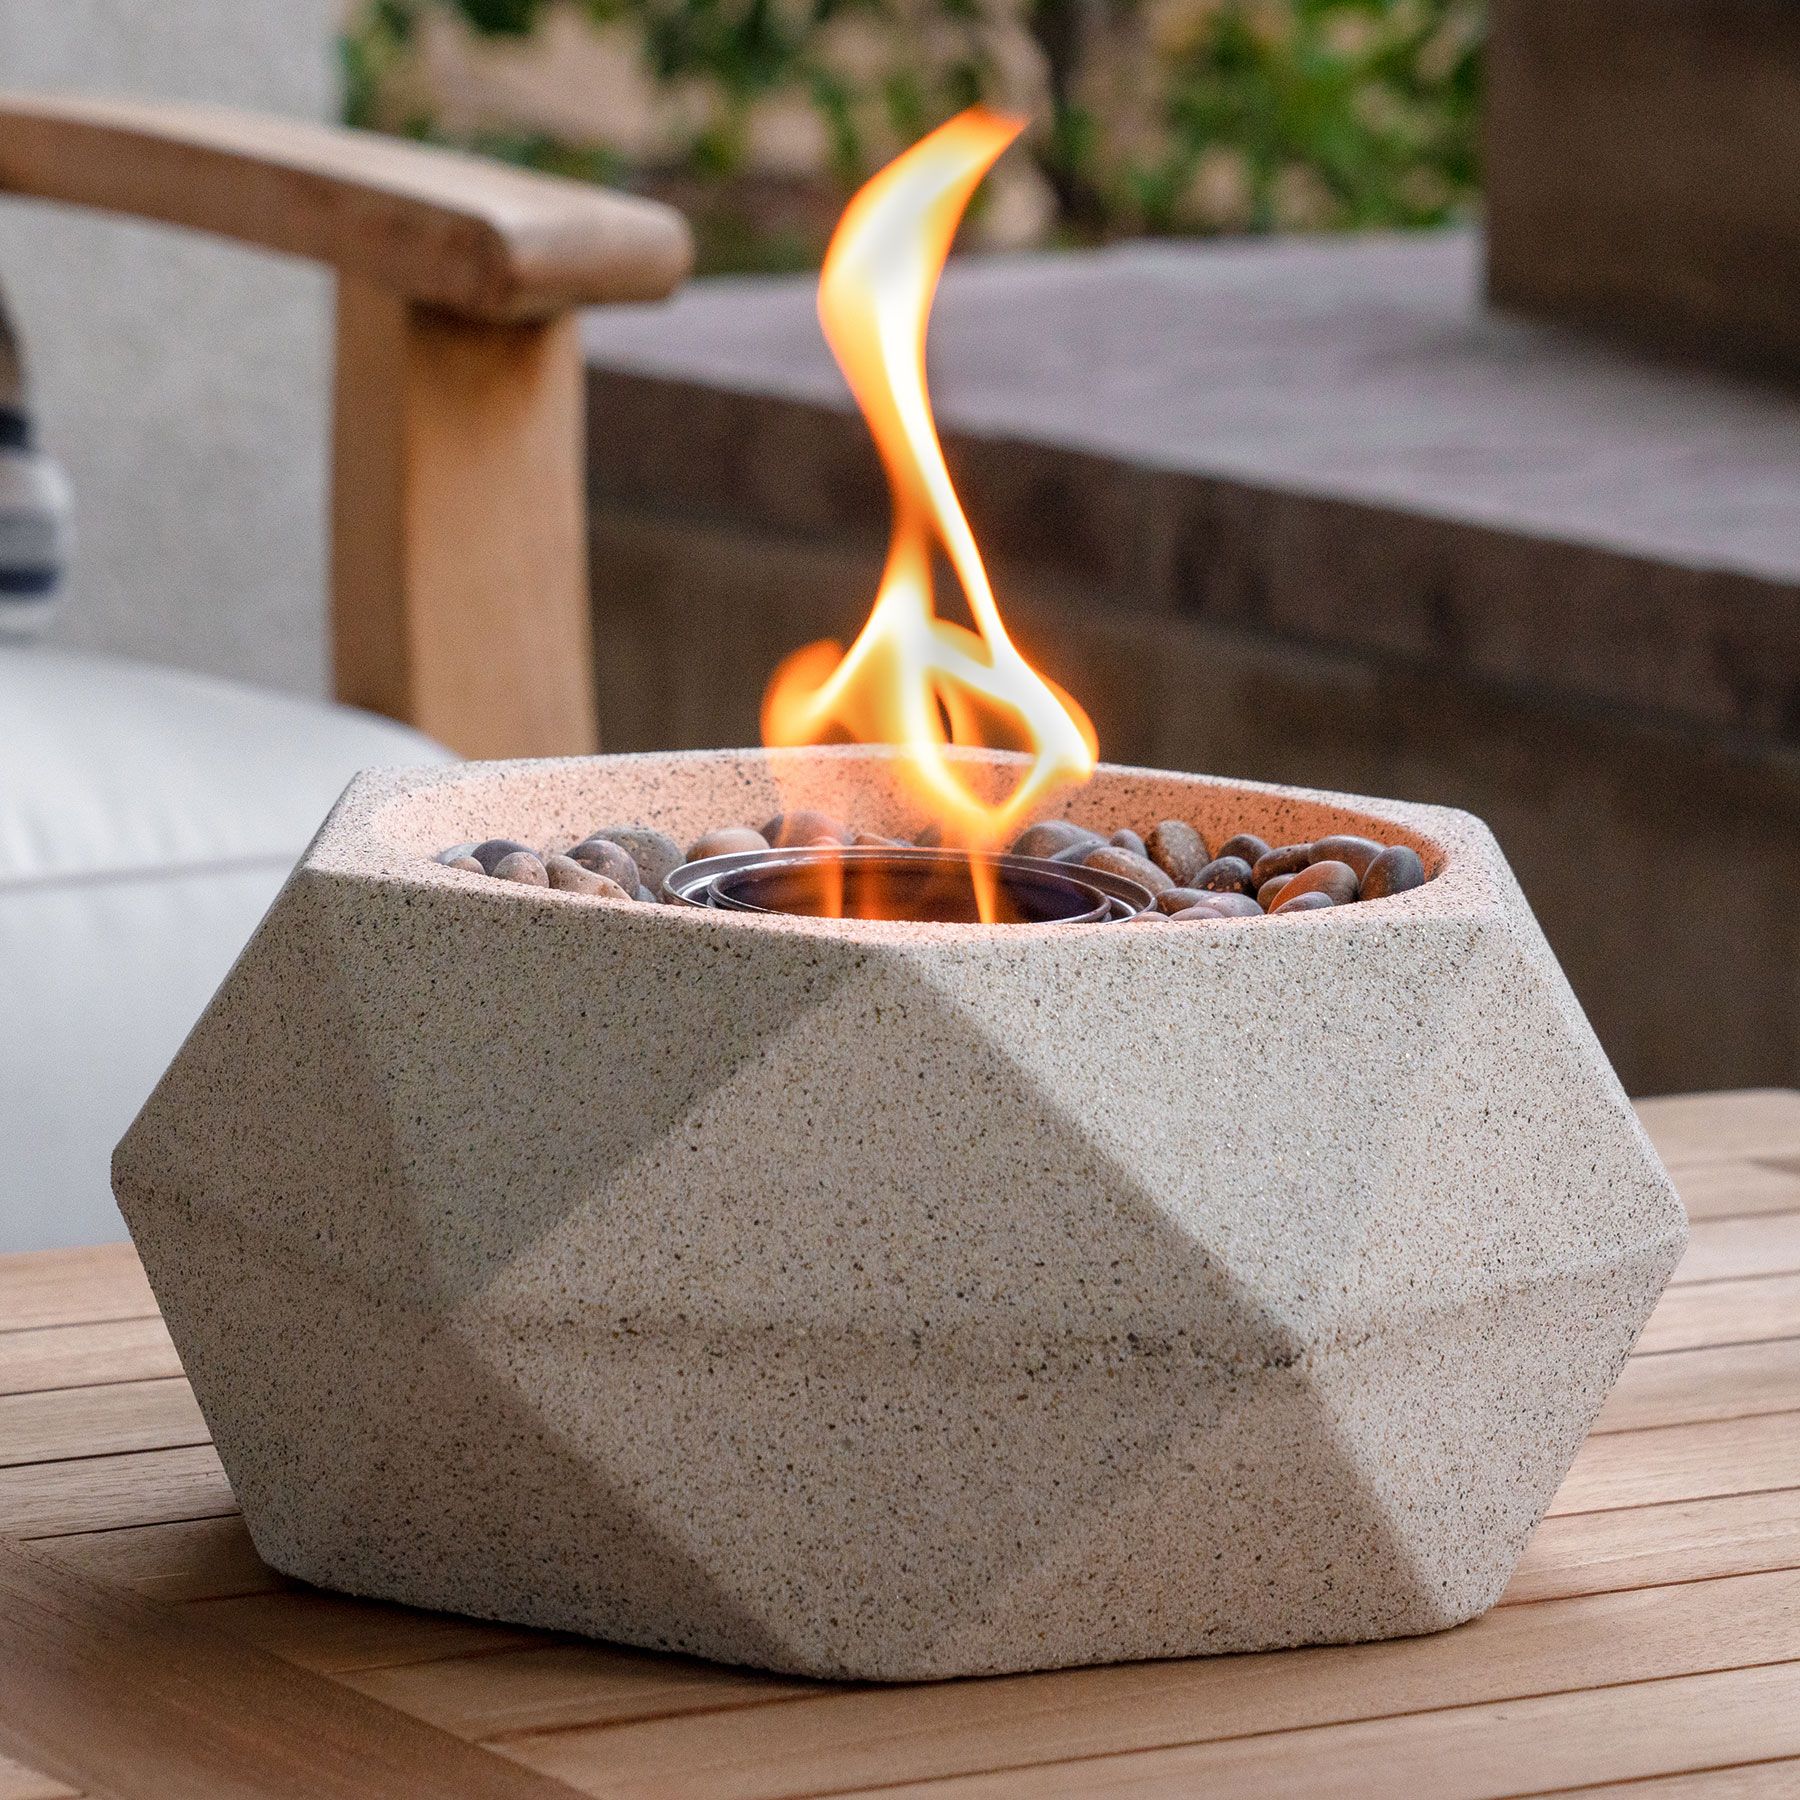 Best Fire Pits: Terra Flame Table Top Fire Bowl